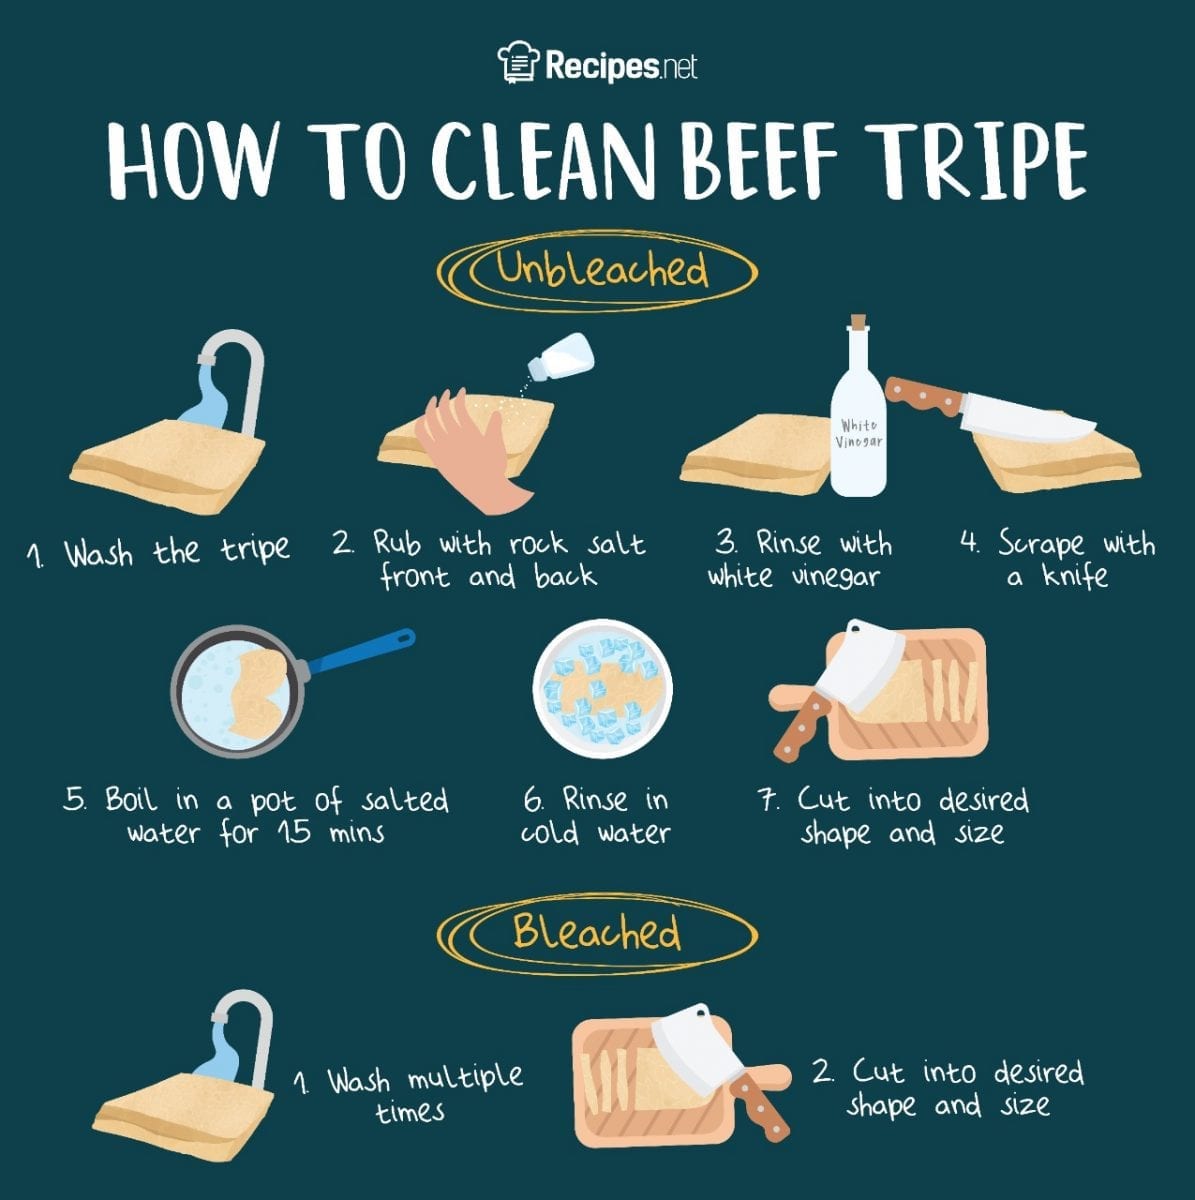 Why Beef Tripe Smells So Bad and Ways to Rid the Smell | Recipes.net